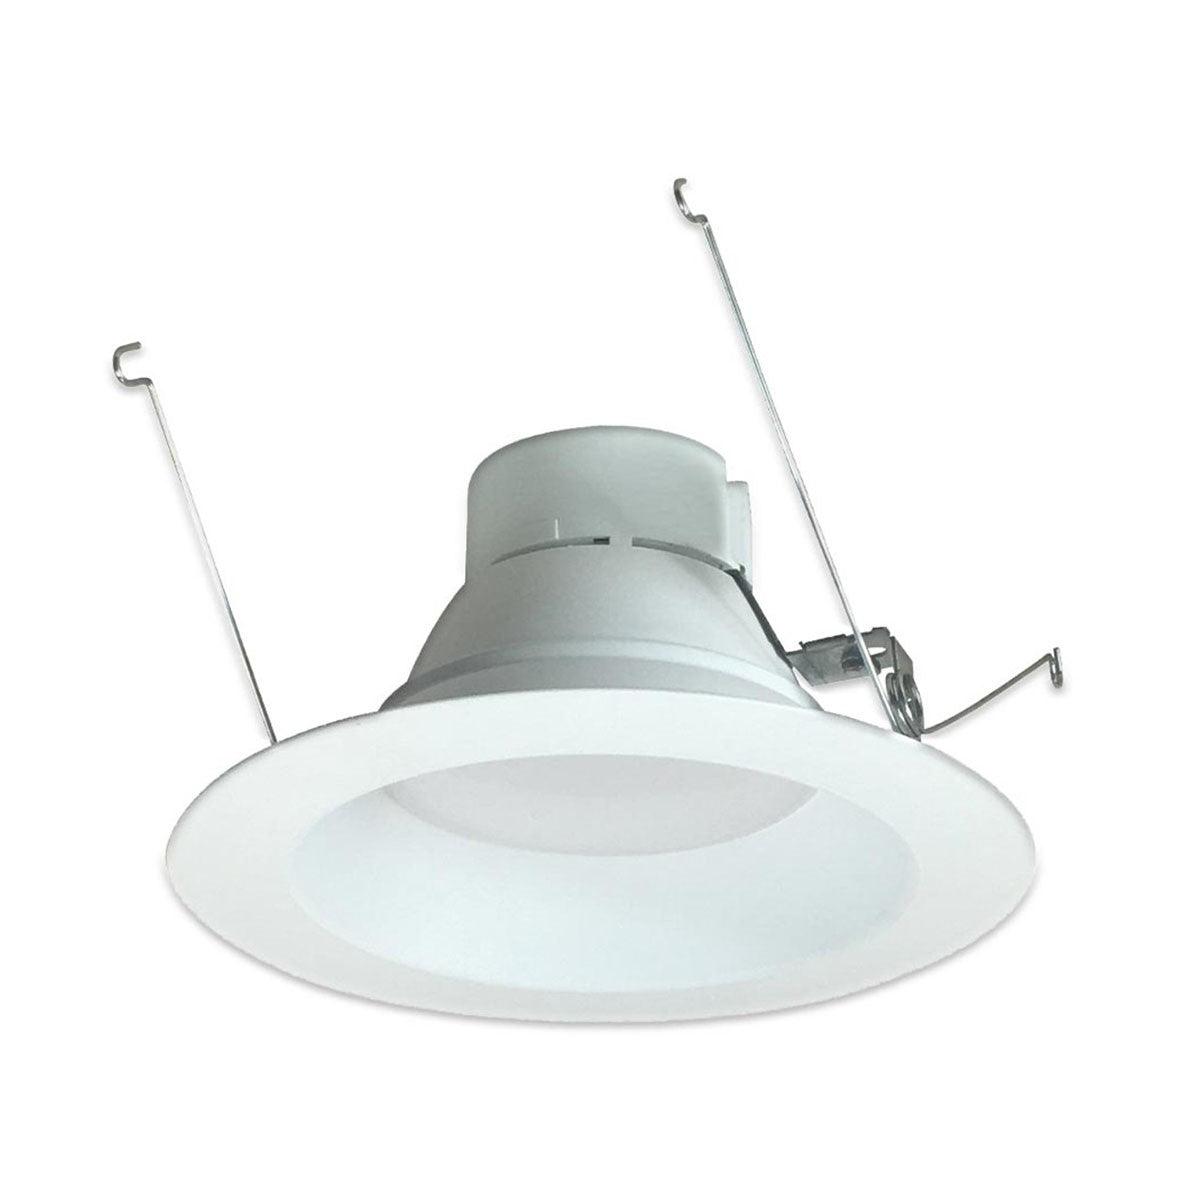 Onyx Recessed LED Can Light, 6 Inch, 15 Watt, 1100 Lumens, Tunable White, 2700K to 5000K, Reflector Trim - Bees Lighting